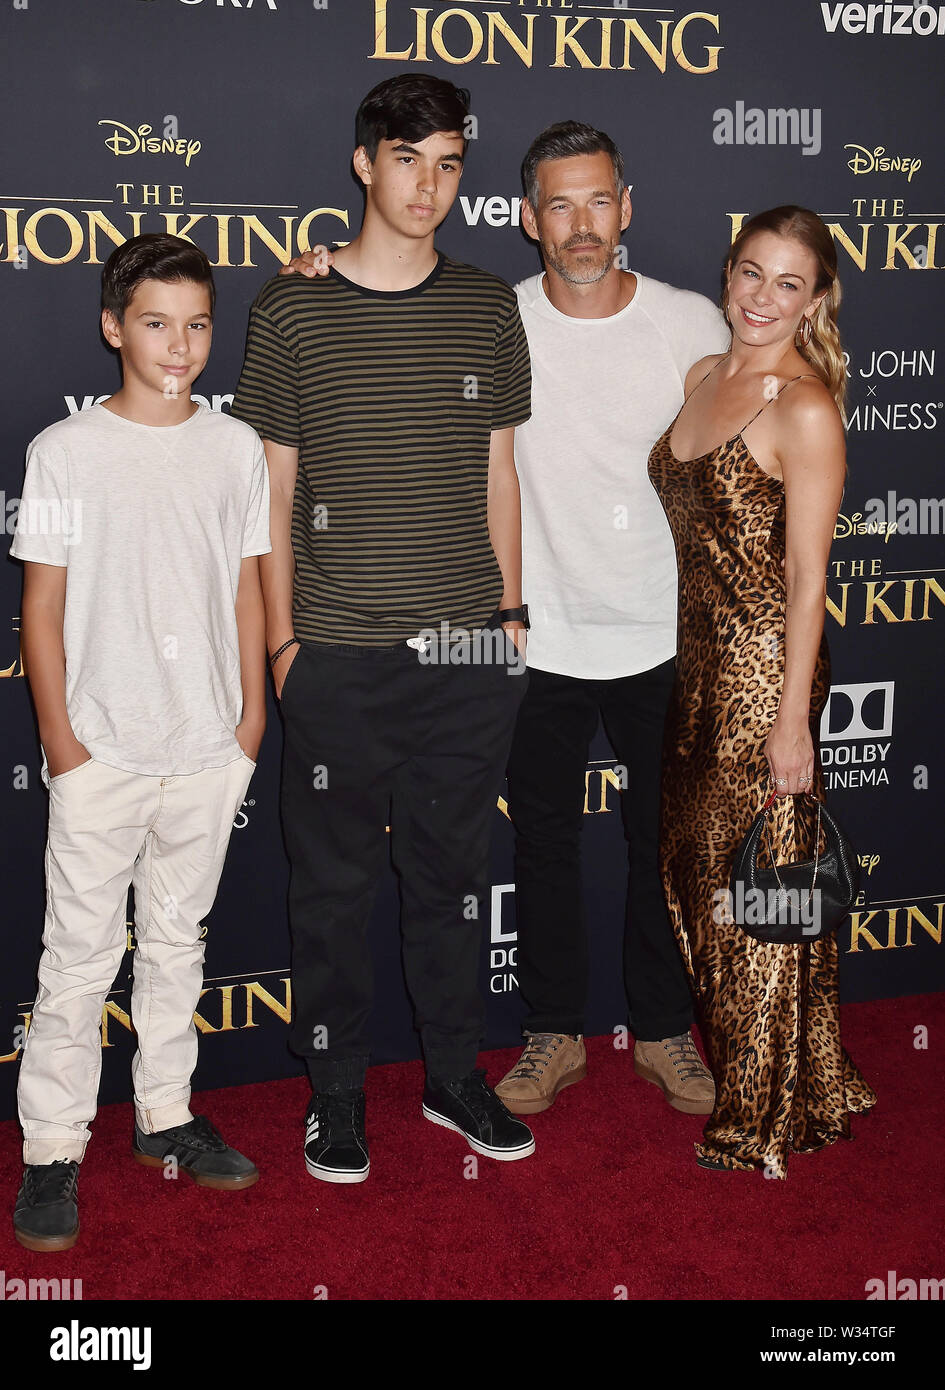 HOLLYWOOD, CA - JULY 09: Eddie Cibrian (2nd from R), LeAnn Rimes (R) and children attend the premiere of Disney's 'The Lion King' at the Dolby Theatre Stock Photo